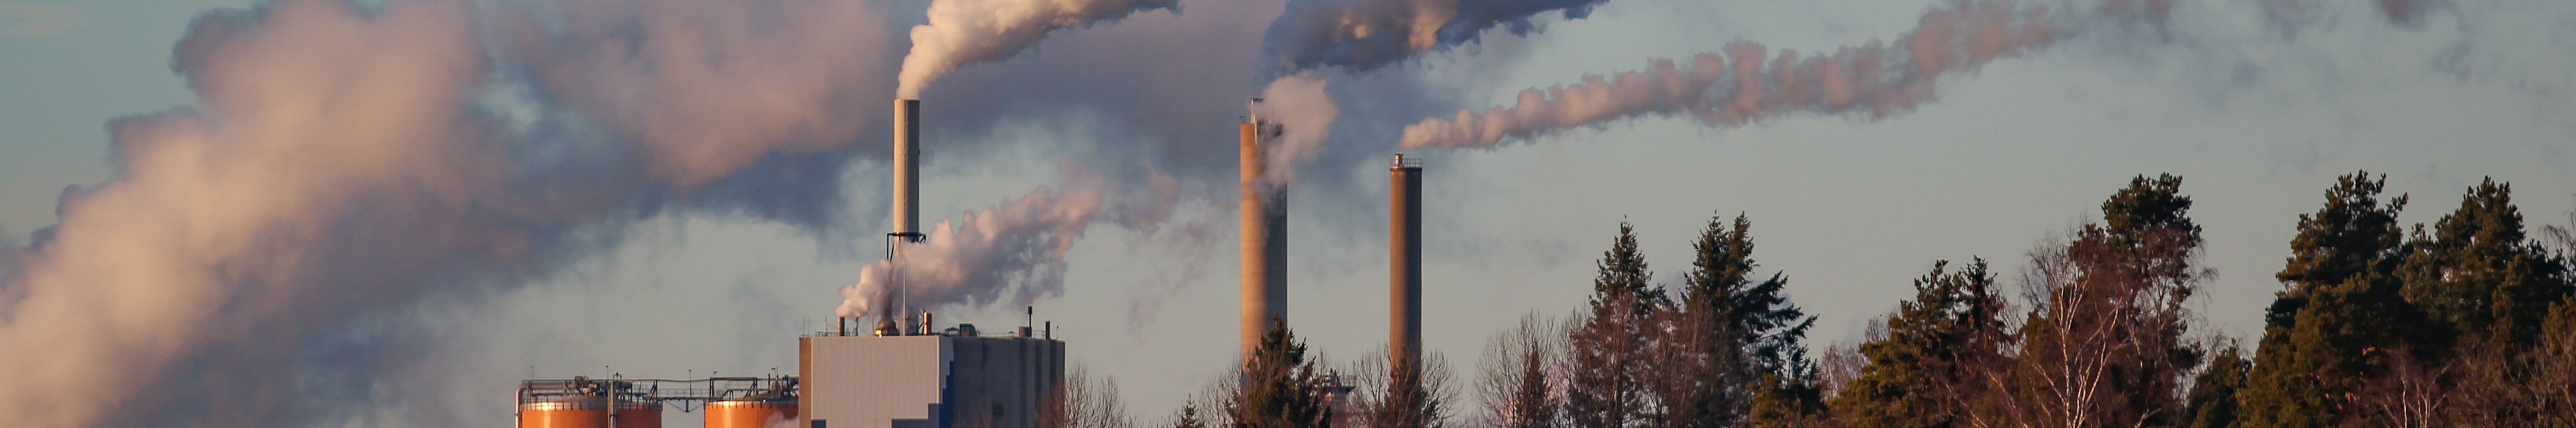 In 2022, Phillips 66 emitted 31,800 t of air pollutants that have harmful impacts on human health